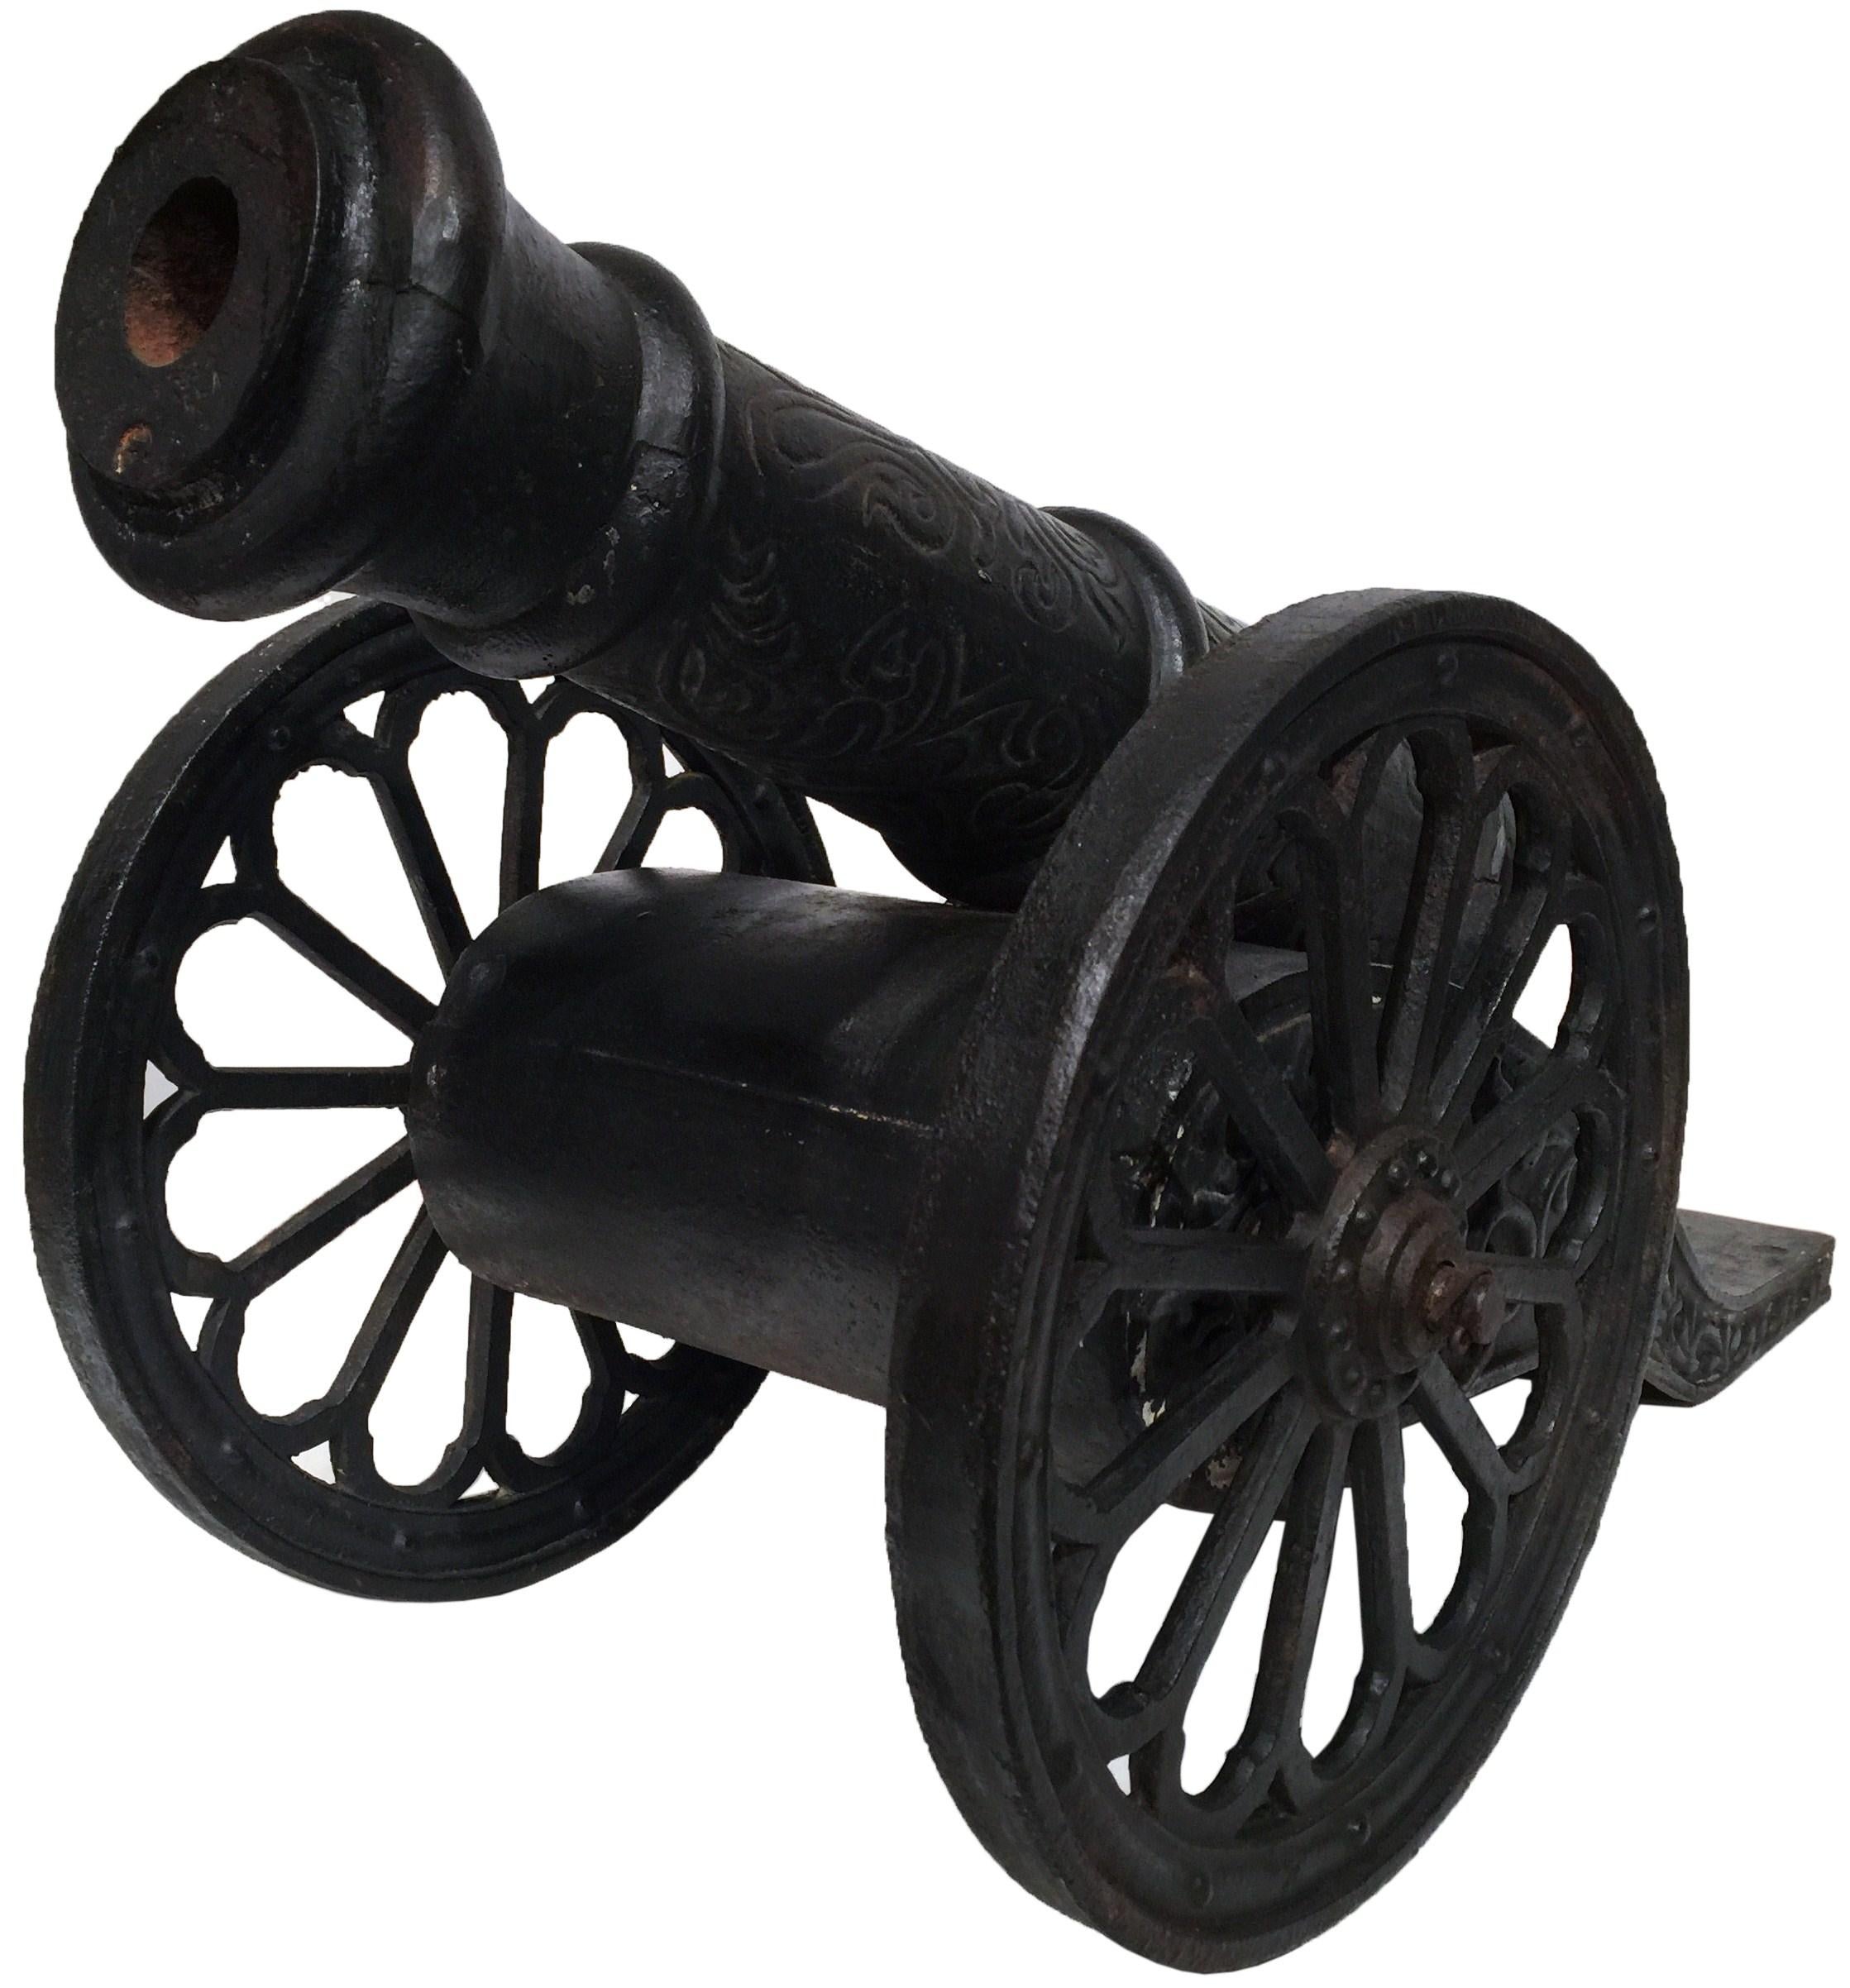 These iron cannons were forged France, circa 1800. The heavy, impressive decorative pieces are in the shape of artillery weapons and are set on wheels for easy mobility. The forged sculptures came from a large chateau in the South of France, and